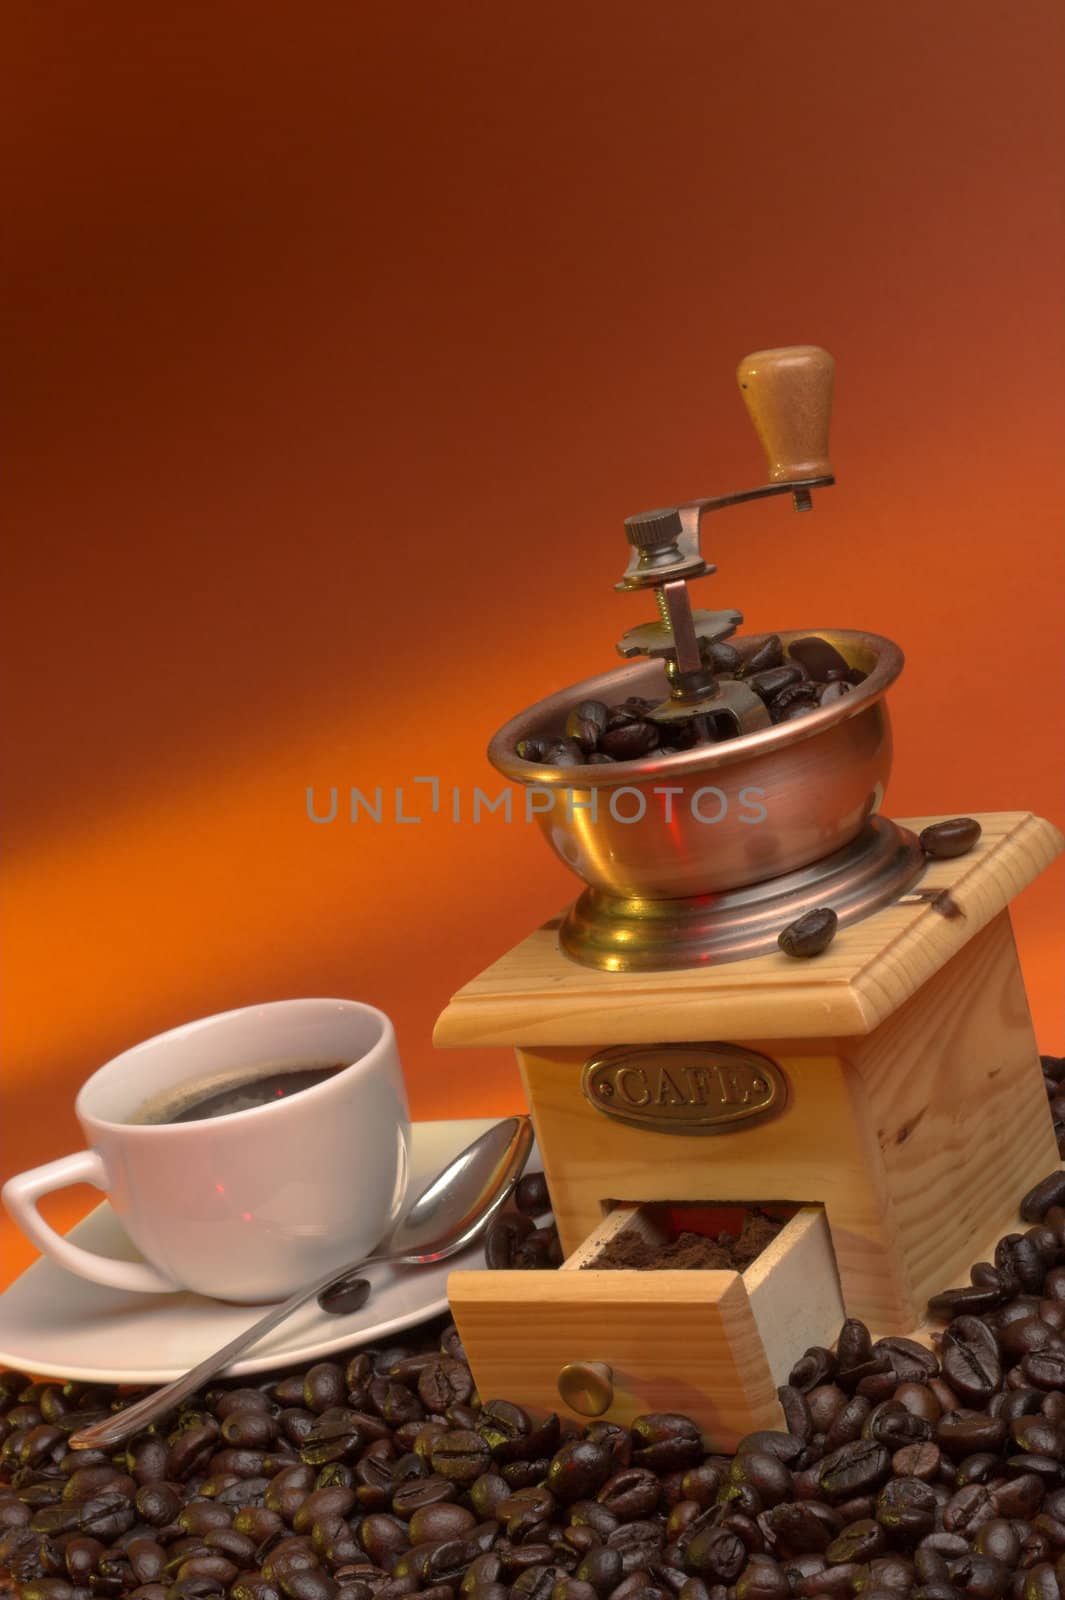 Coffee mill and coffee by alexkosev